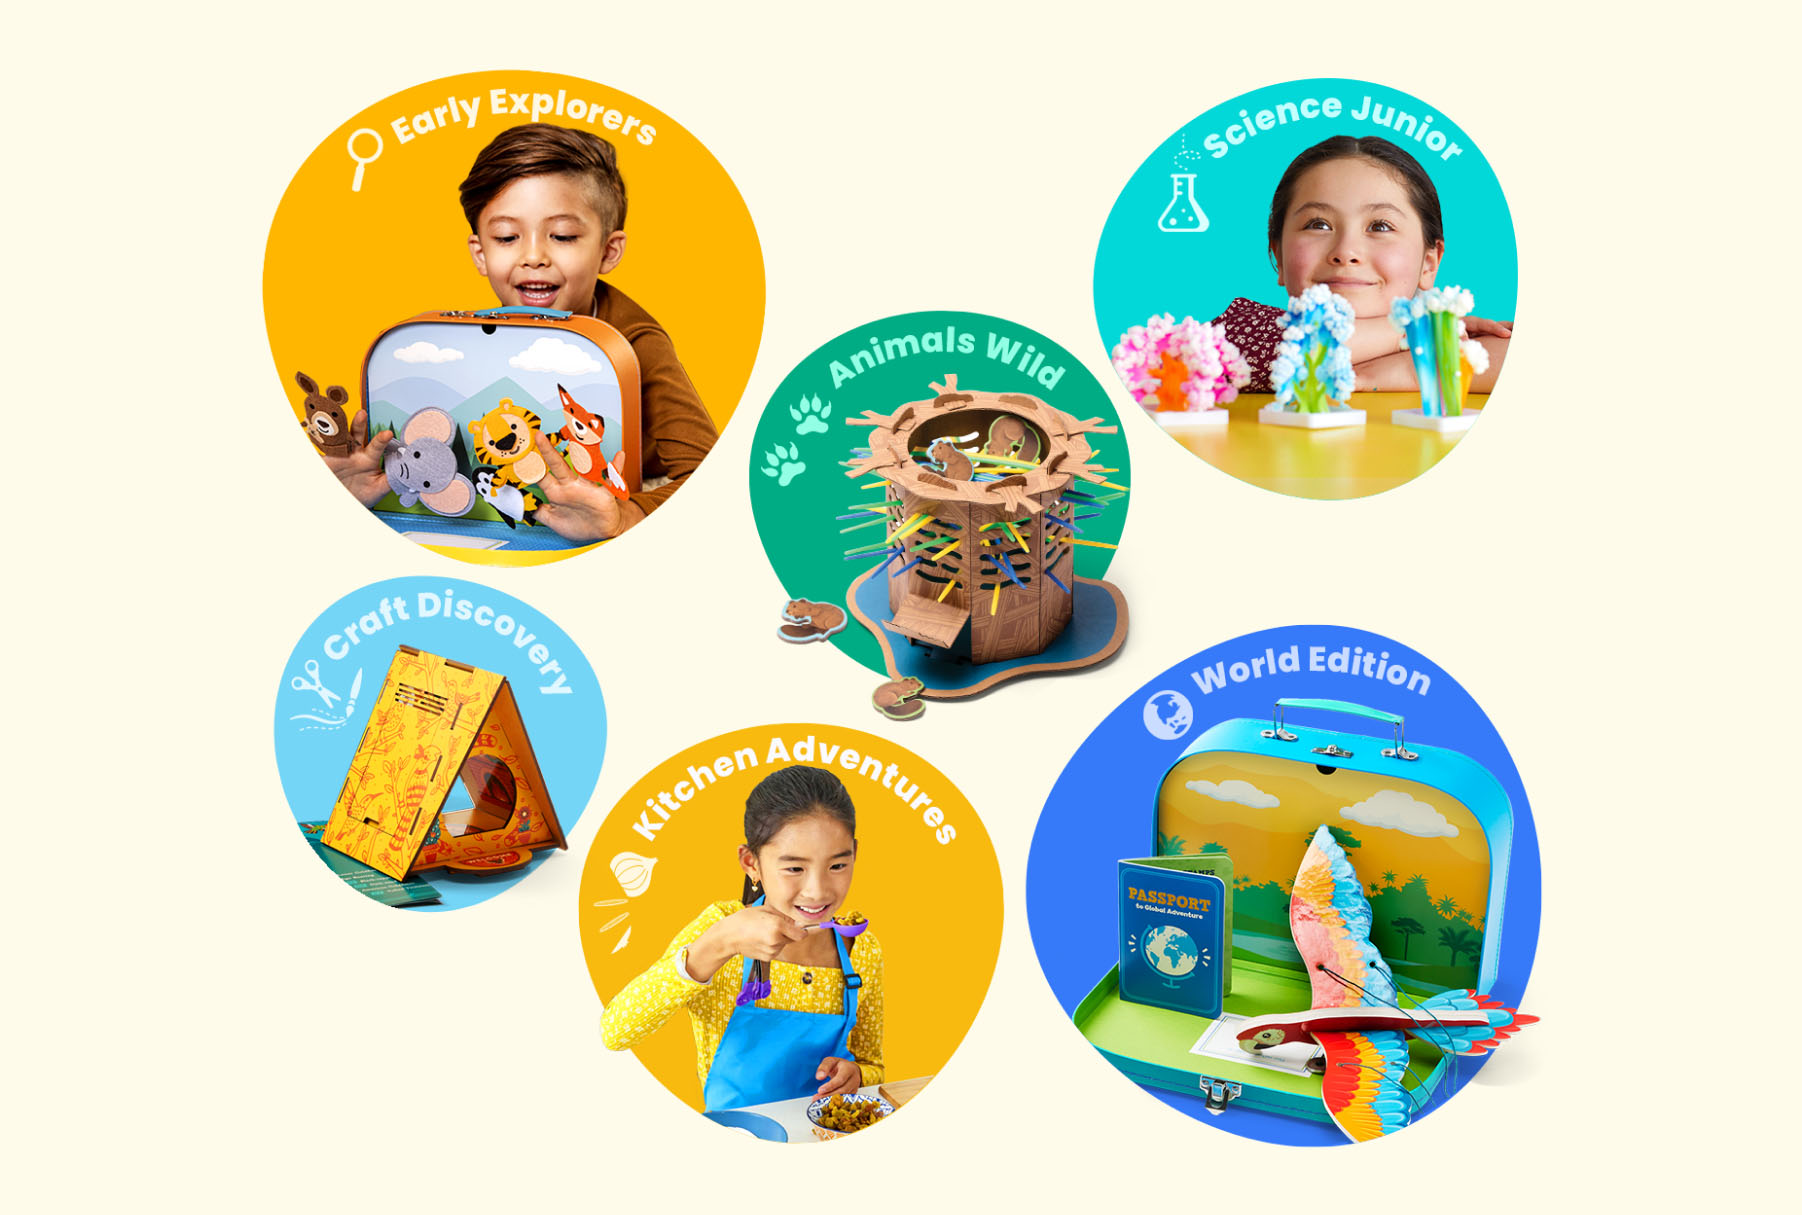 Children with activities from various Little Passports subscription lines